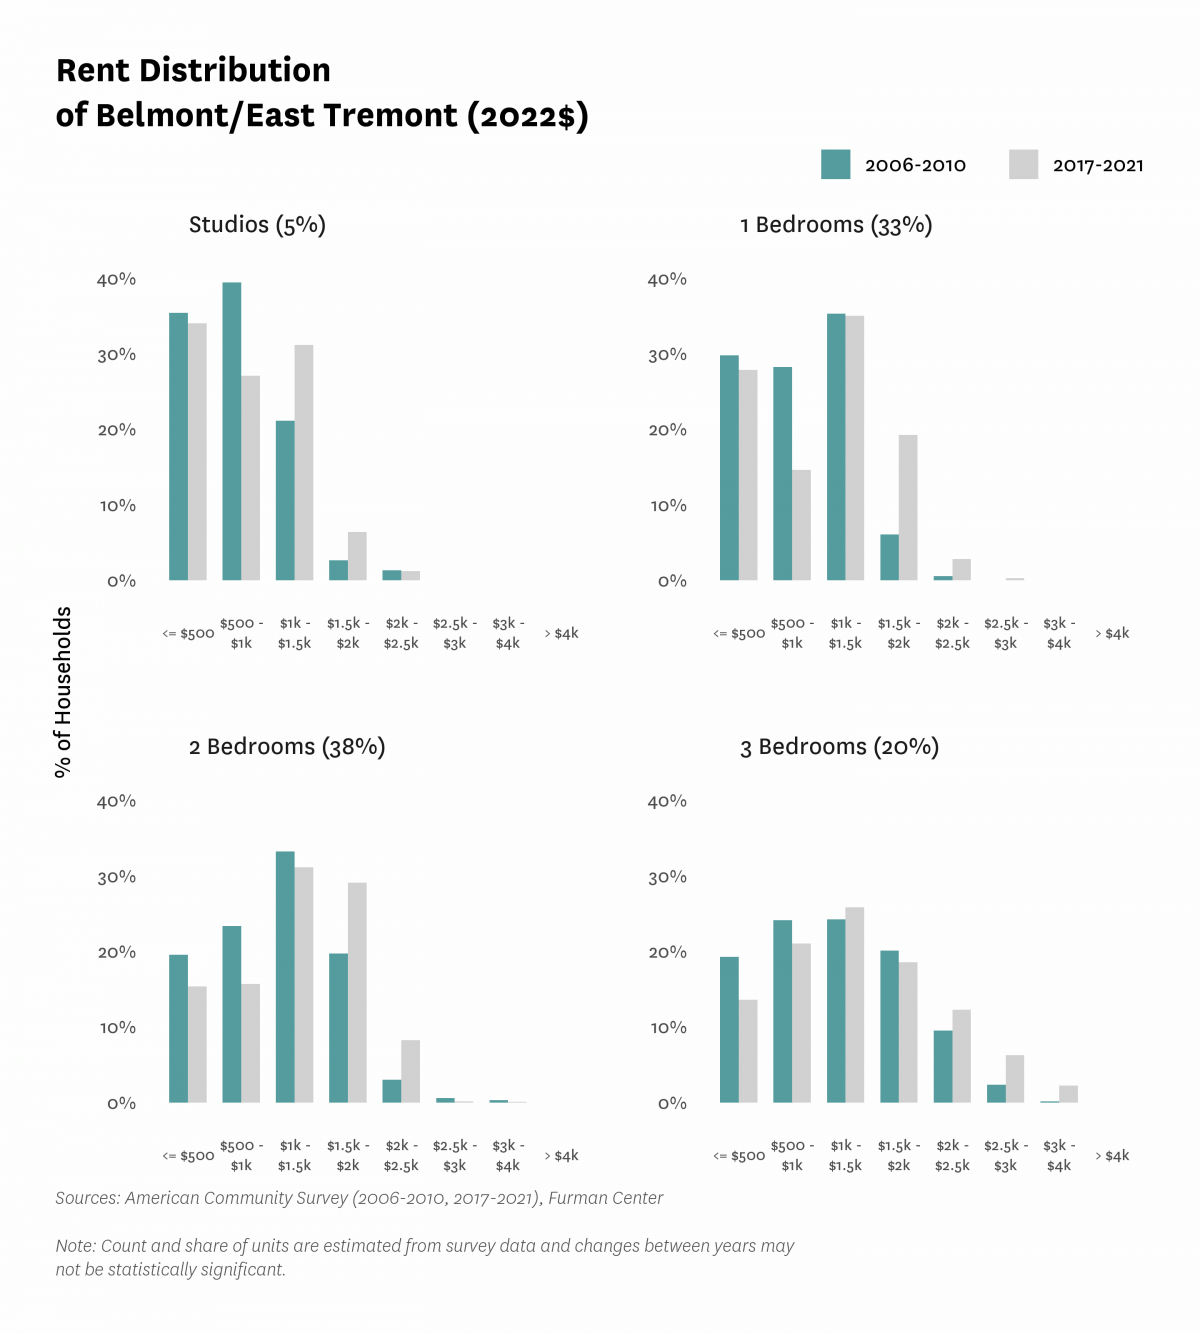 Graph showing the distribution of rents in Belmont/East Tremont in both 2010 and 2017-2021.